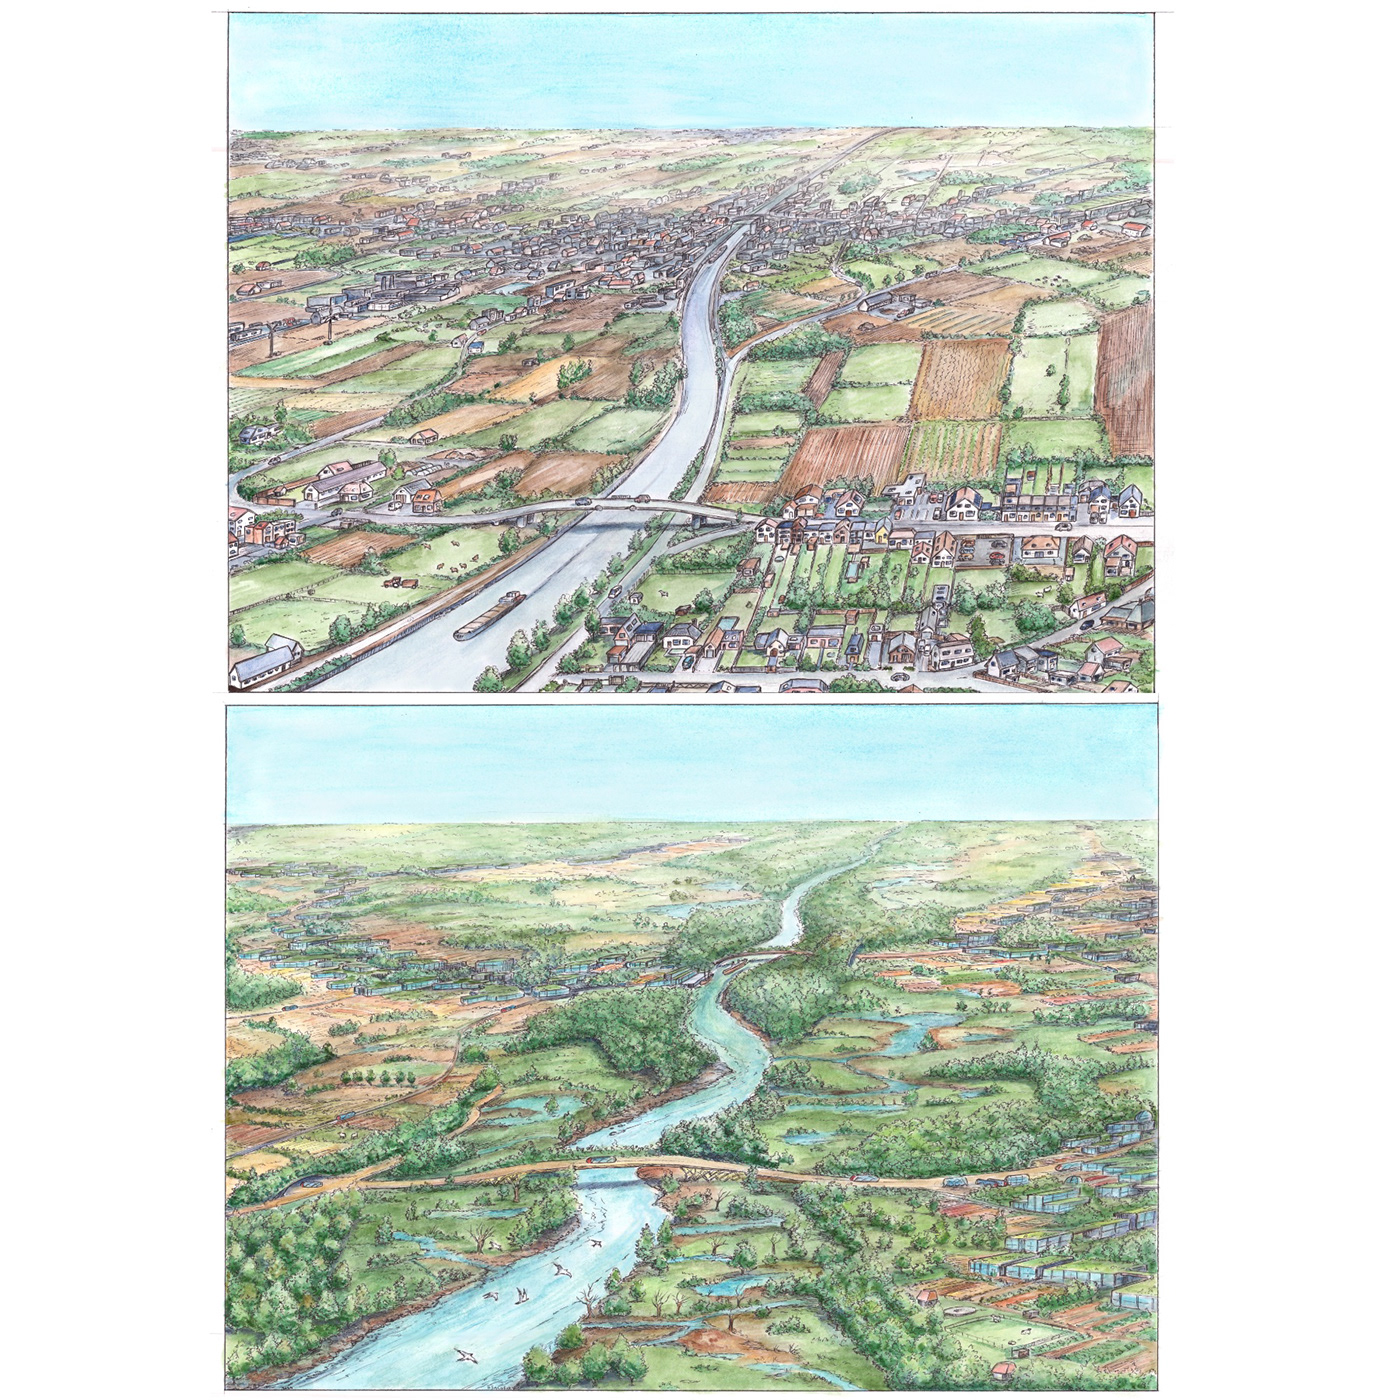 A river before and after
